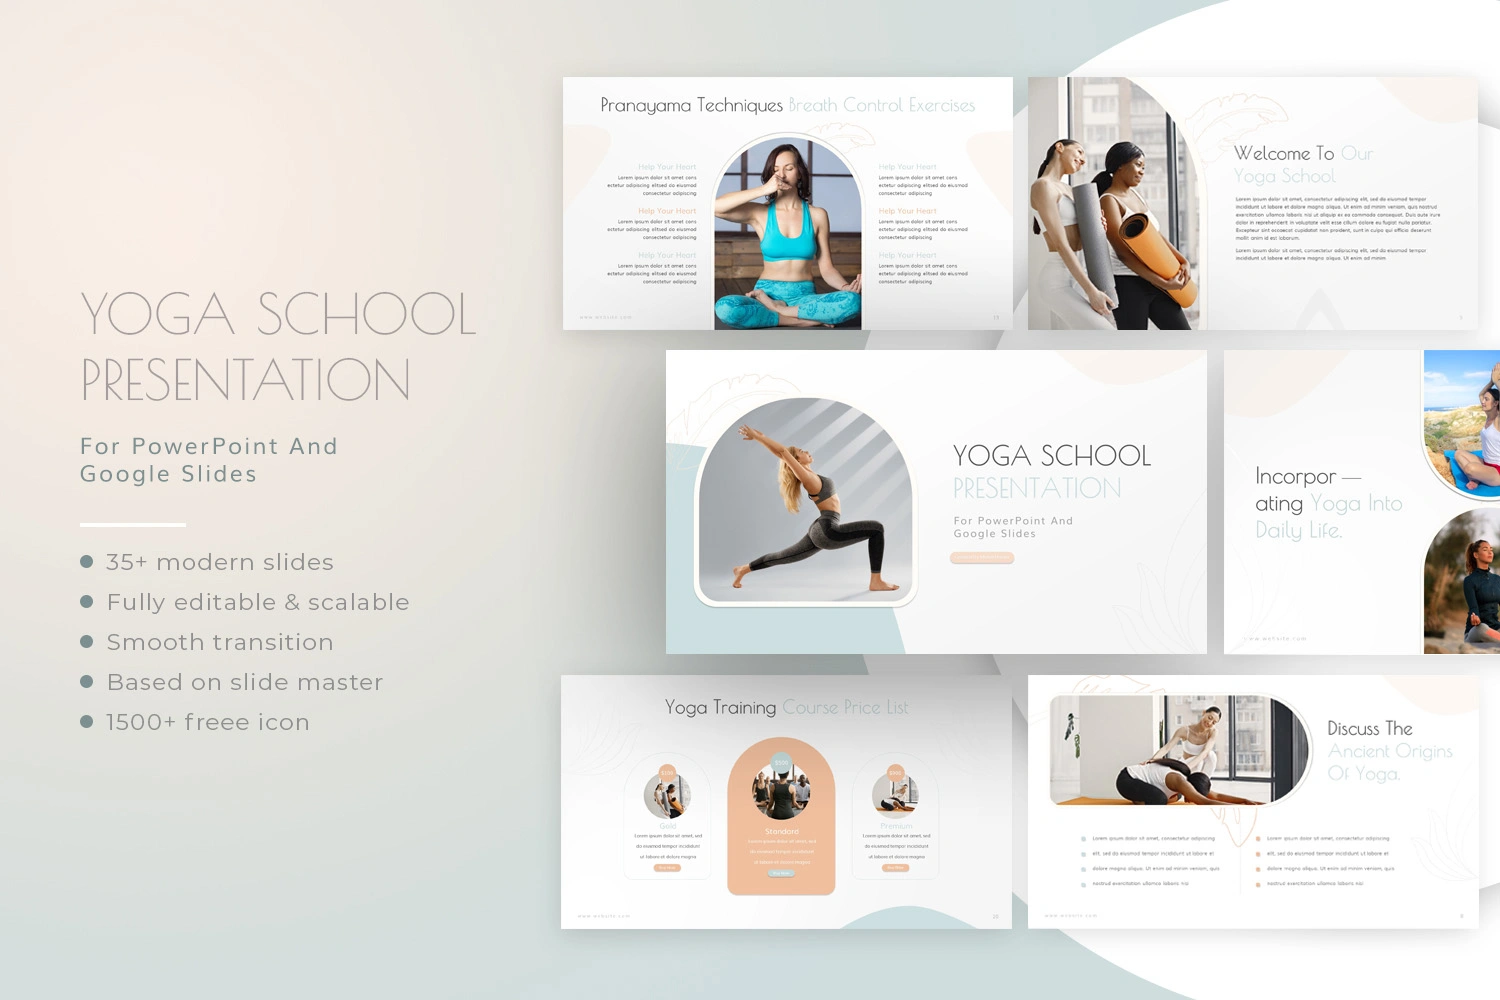 Free Yoga School Presentation Template for PowerPoint and Google Slides